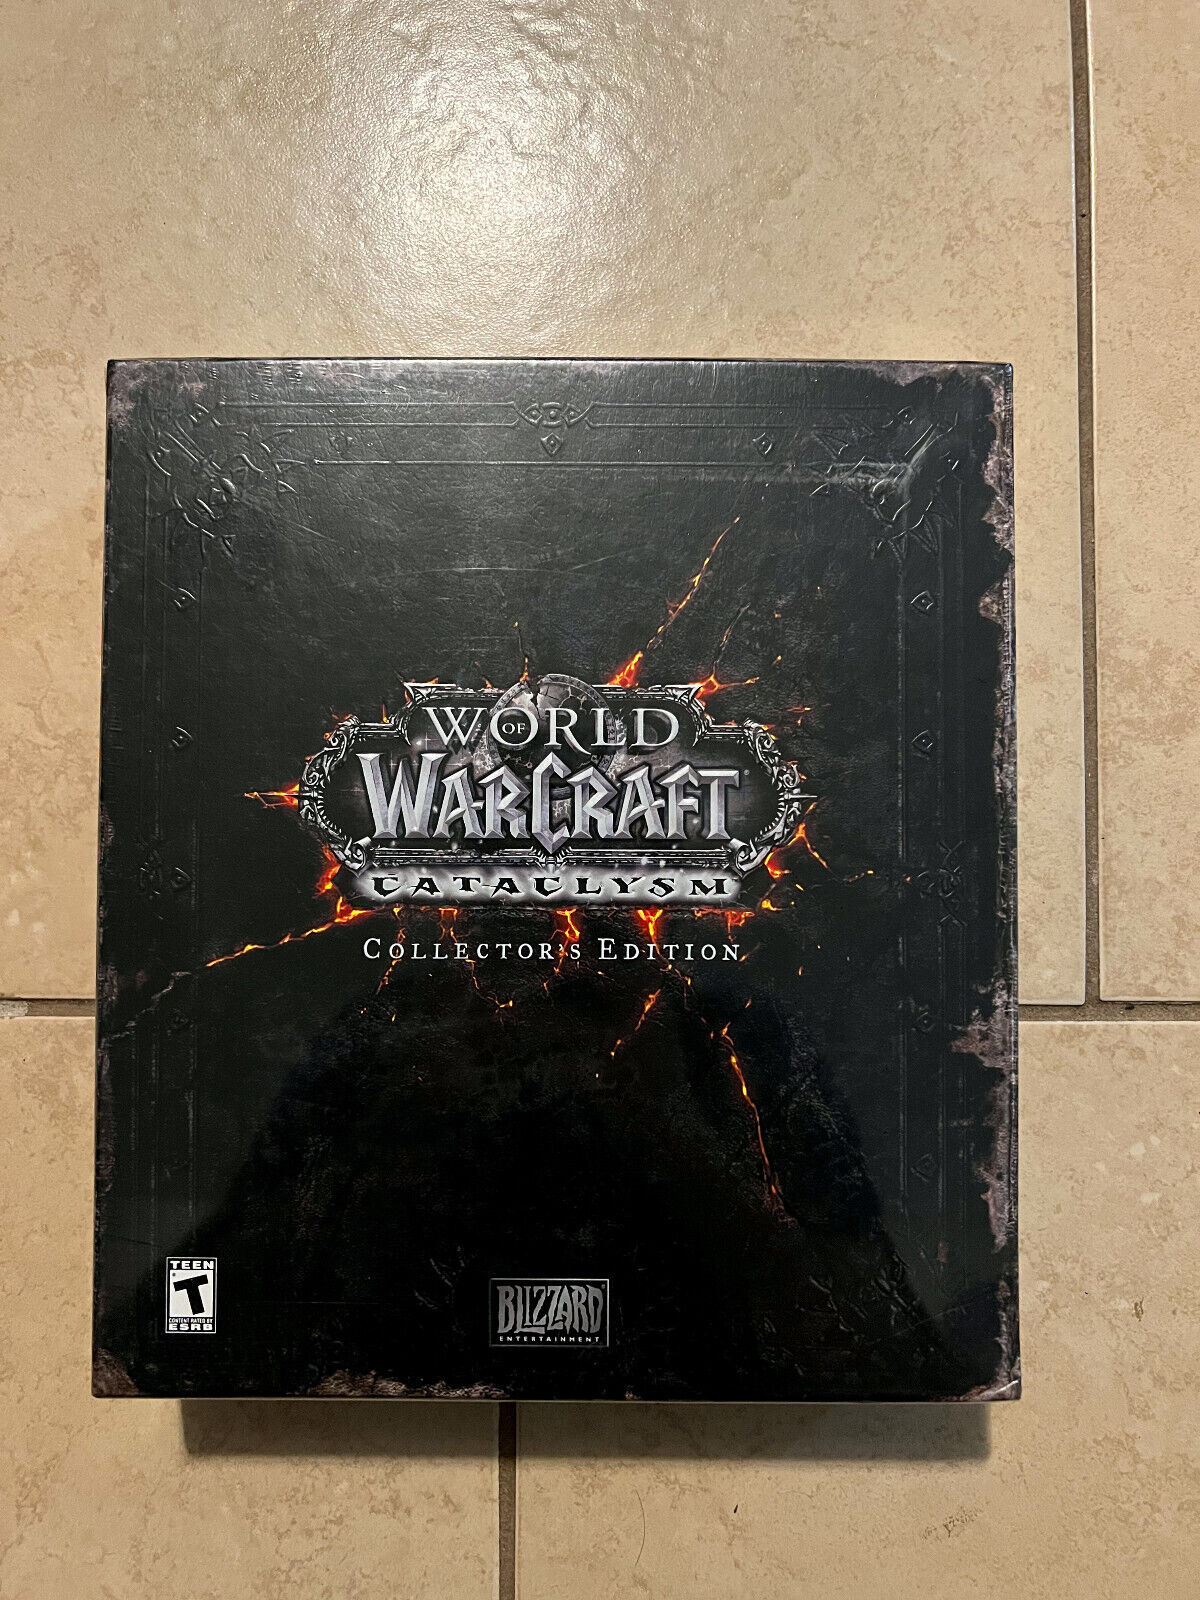 World of Warcraft FACTORY SEALED Cataclysm Collector's Edition UNUSED